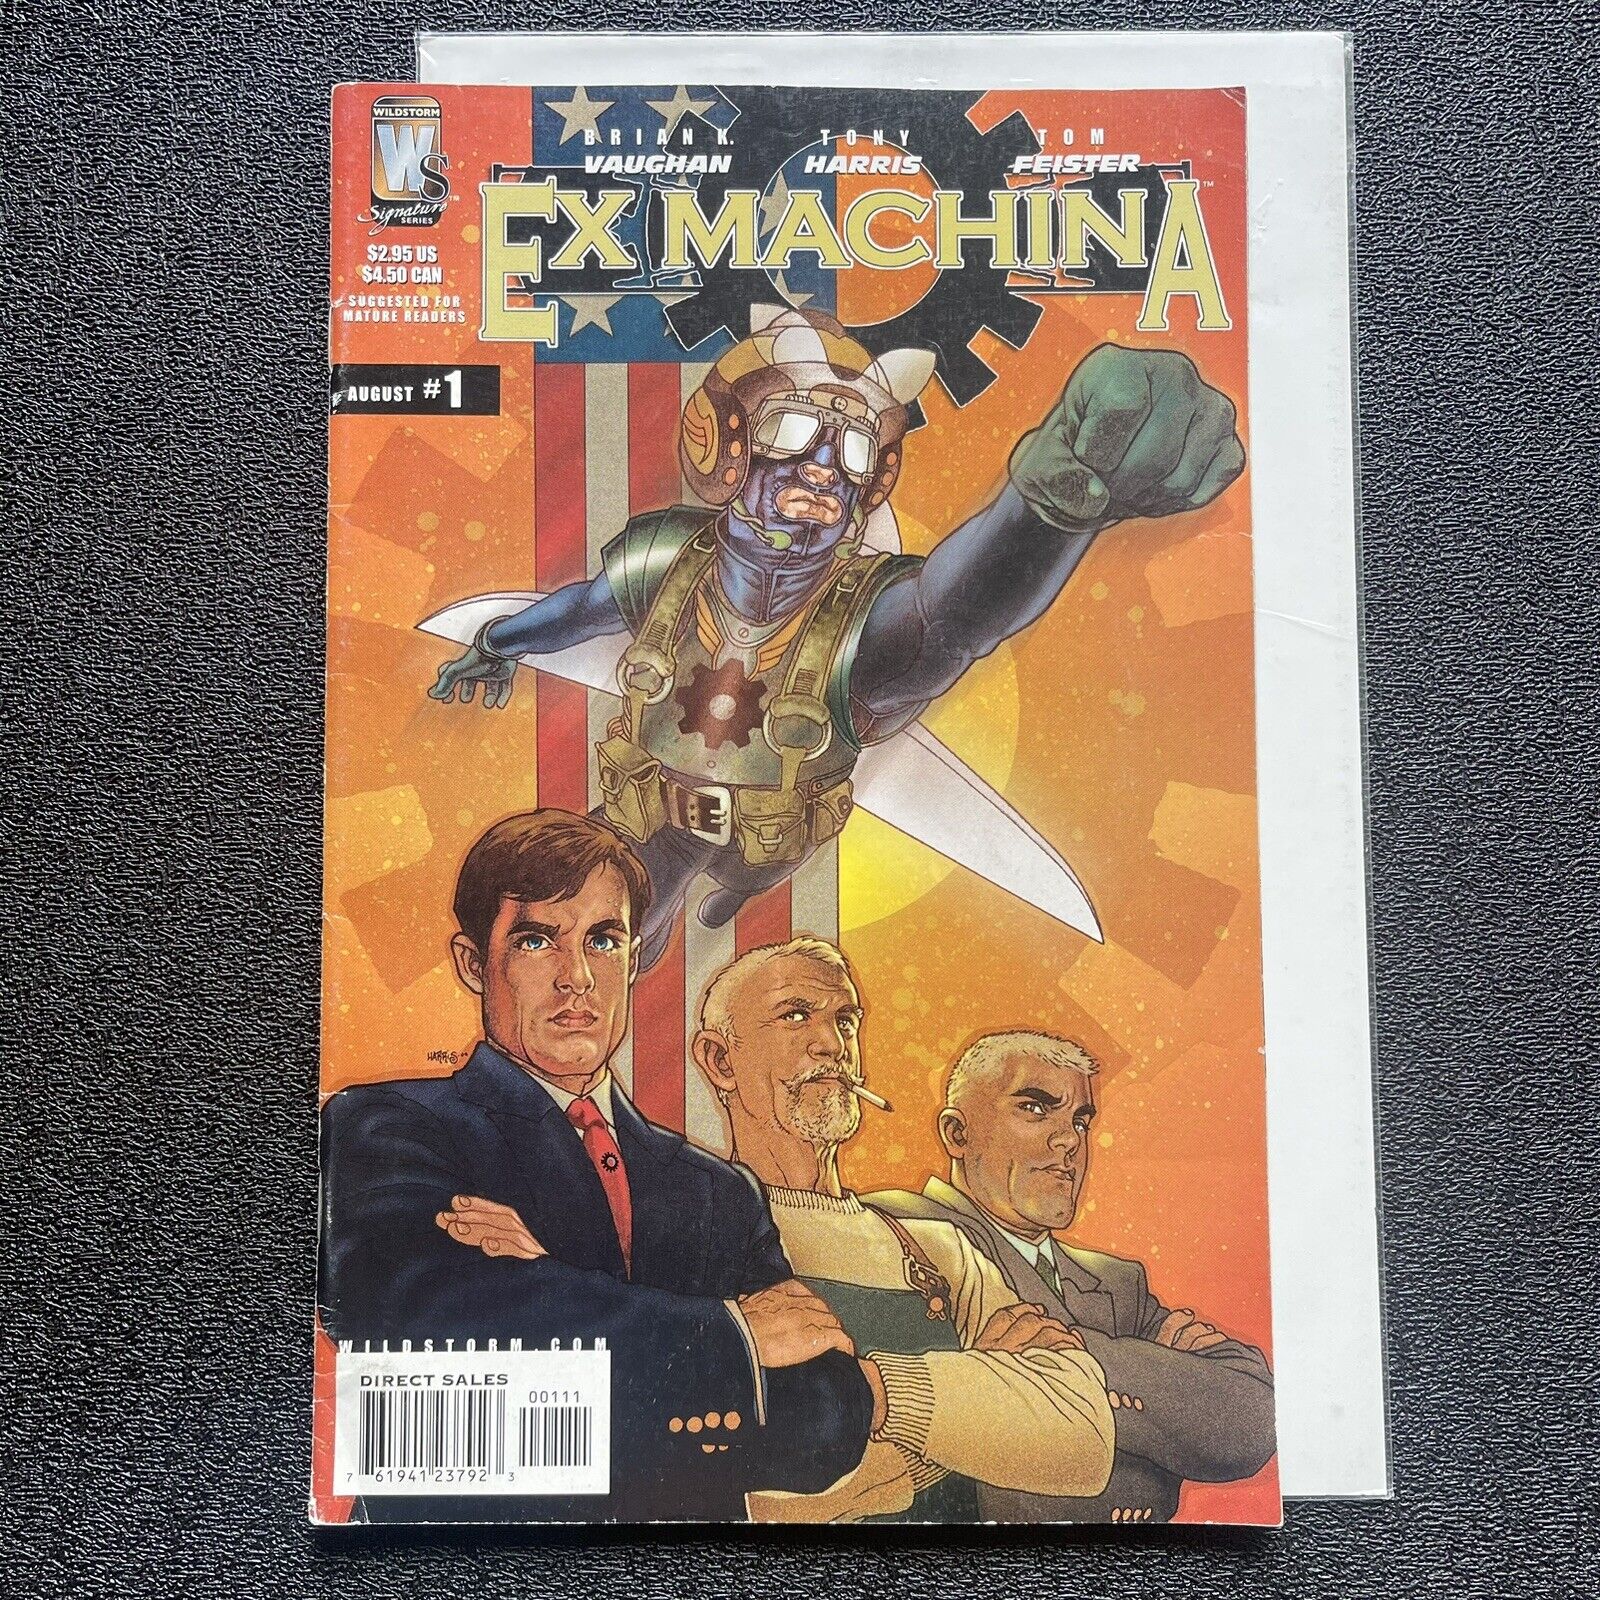 Ex Machina Issue #1; Used/Very Good Condition